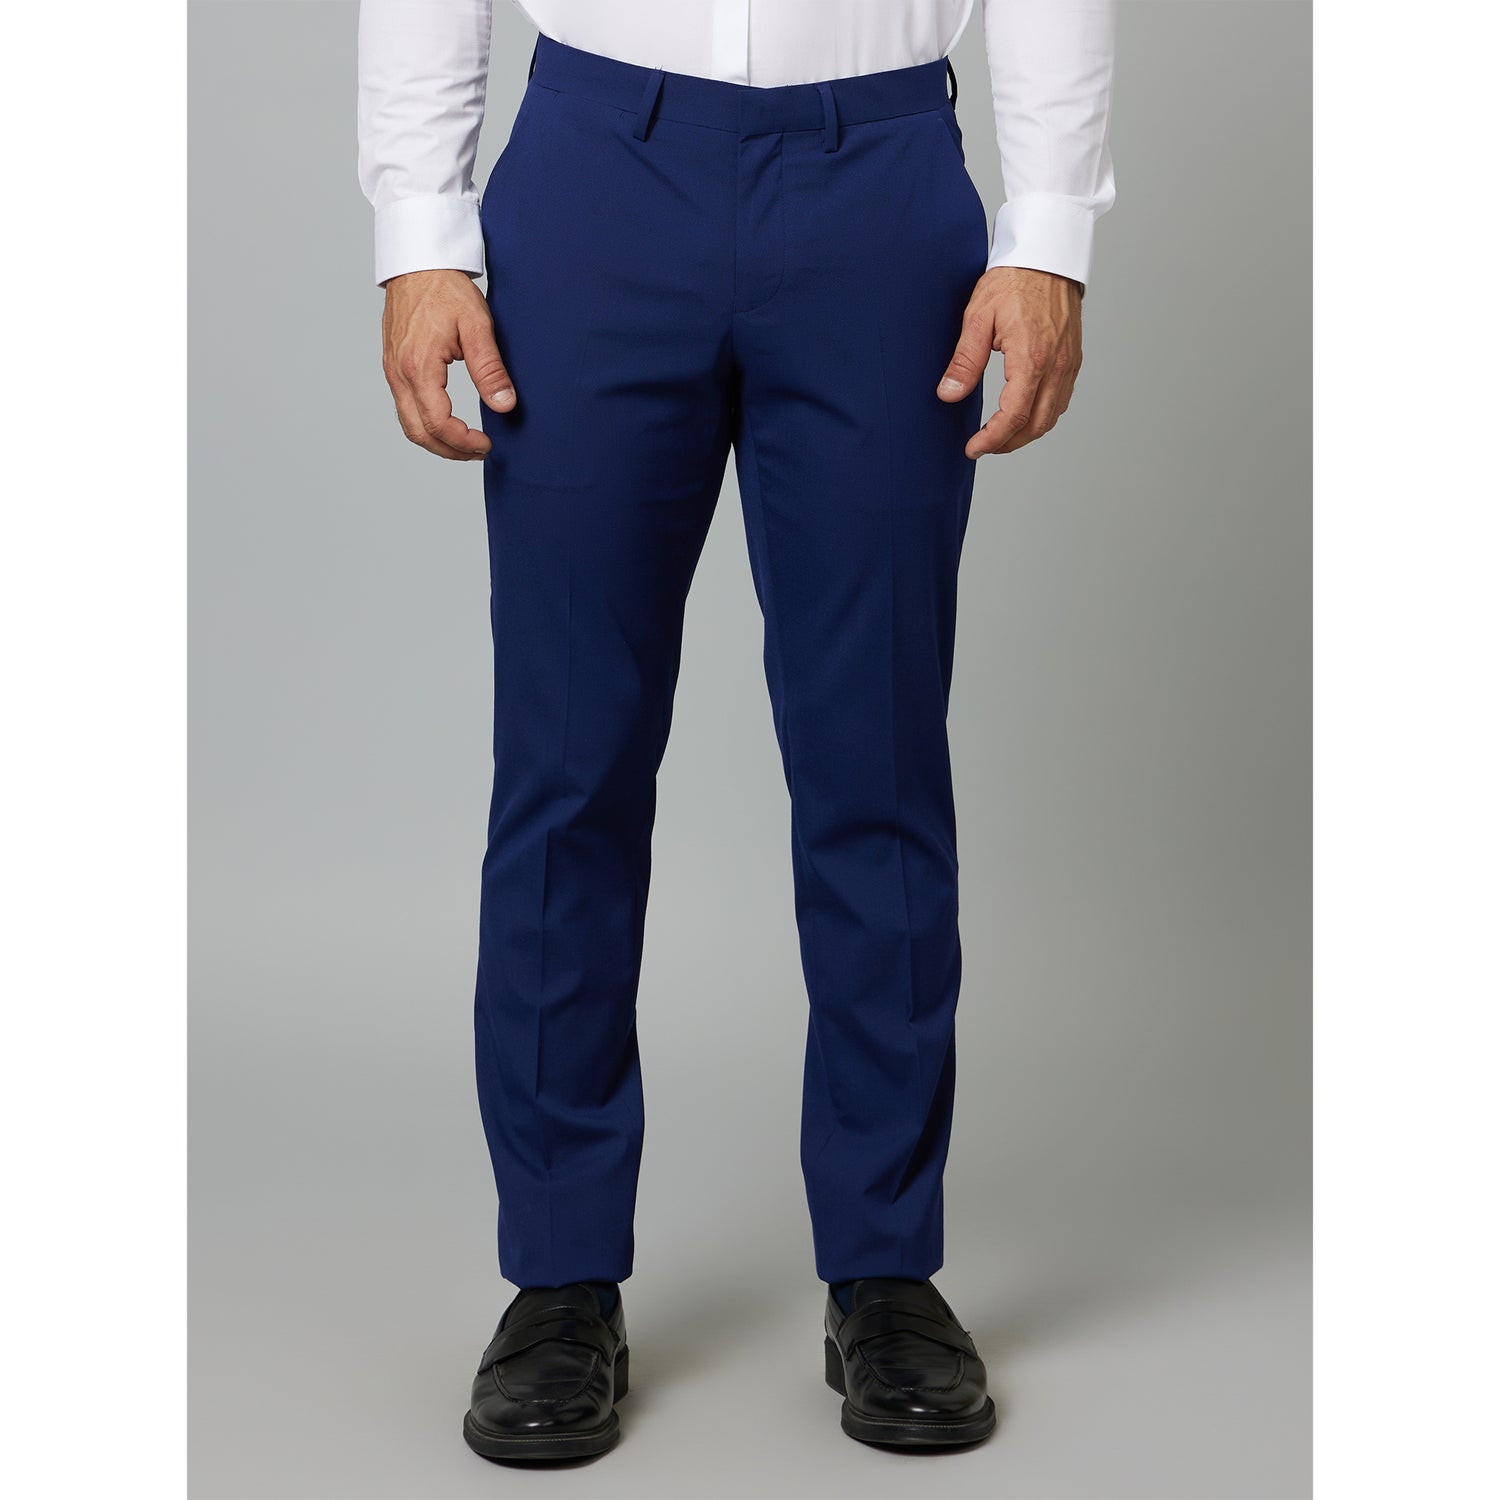 Blue Colored Mid-Rise Slim Fit Formal Trousers (BOAMAURY1)